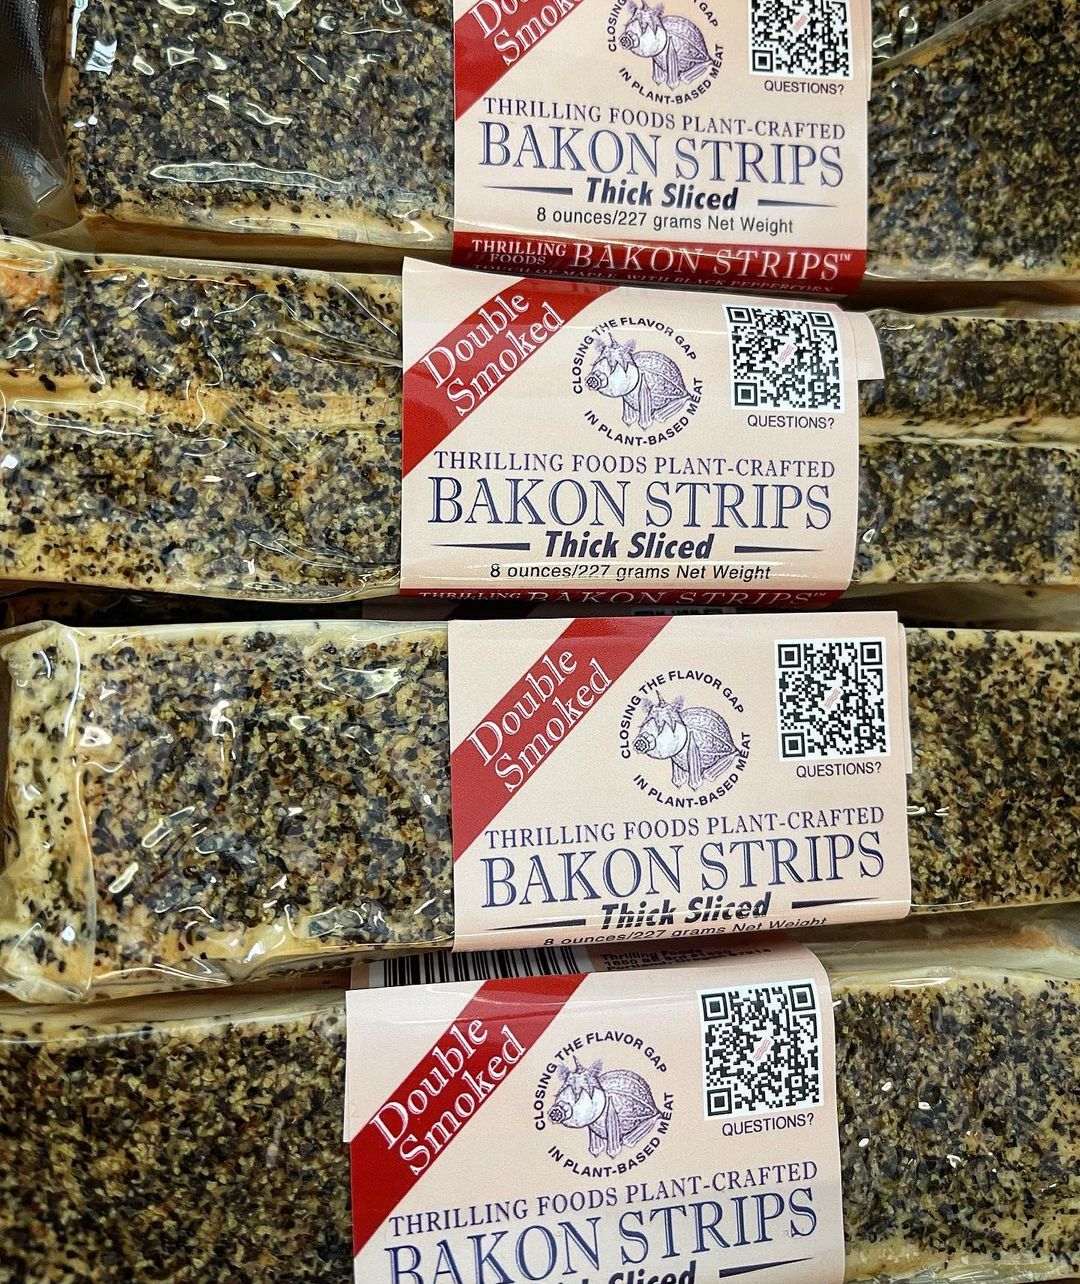 Thrilling Foods Bacon is restocked!!!
NOOCH is currently OPEN daily, Mon-Fri 11-7pm & Sat+Sun 11-6pm.
IF YOU MISSED OUR CLOSING ANNOUNCEMENT: OUR LAST DAY WILL BE SATURDAY MAY 14th, 2022 💛 GIVE US A CALL WITH ANY QUESTIONS 720-328-5324 (at Nooch |...